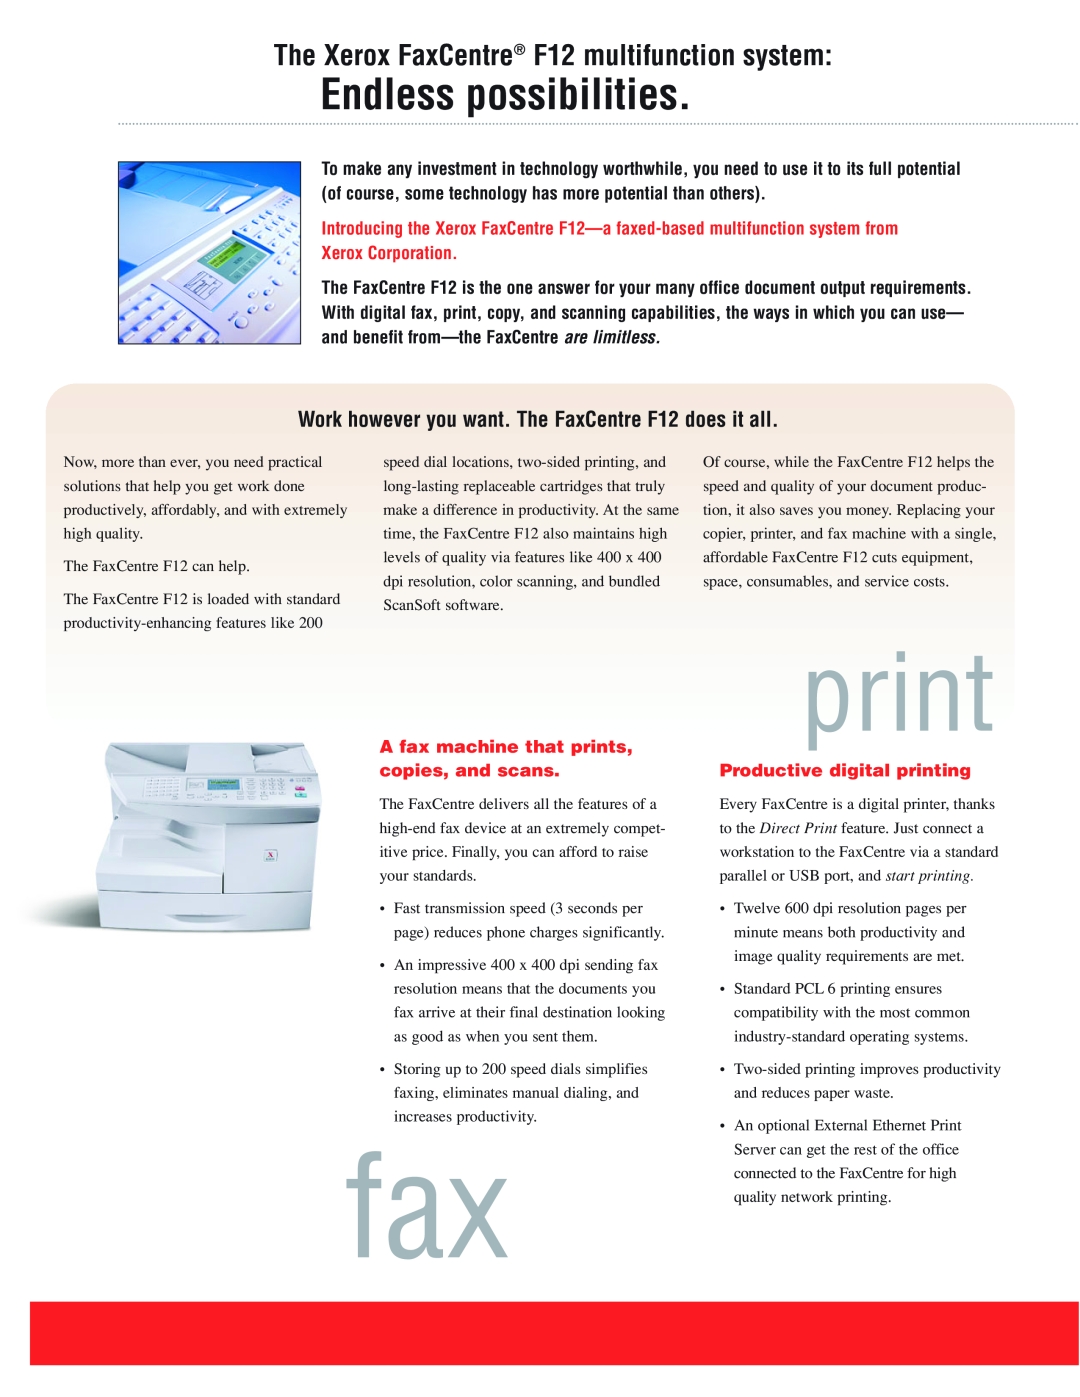 Xerox F12 manual Xerox Corporation, A fax machine that prints, copies, and scans, Productive digital printing 